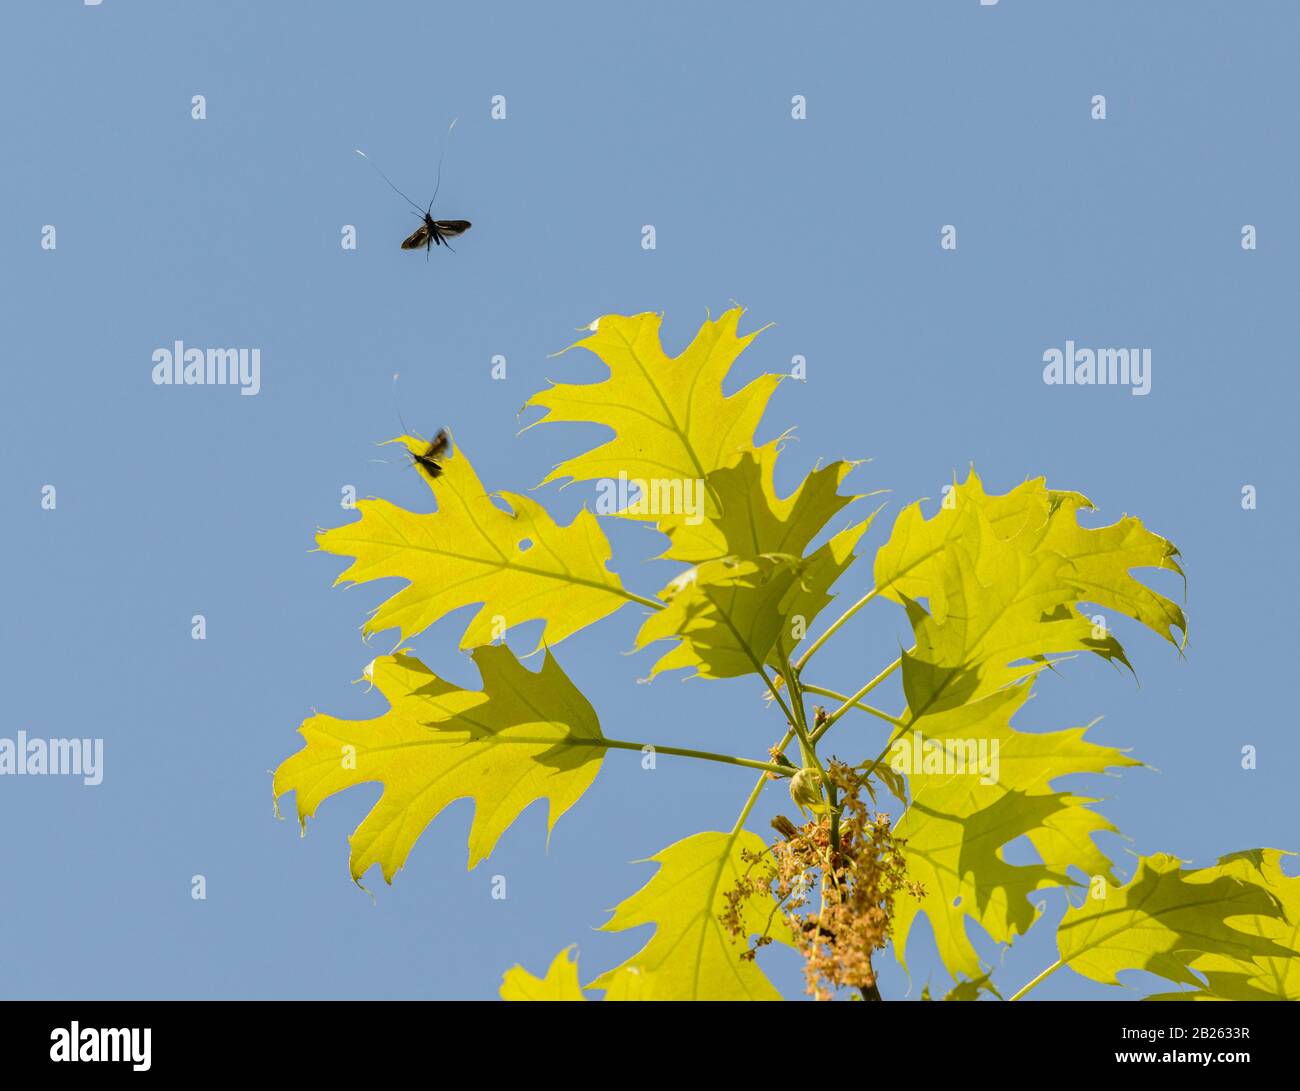 black winged insects with long antennas flying around green oak leaves against blue sky, wild Stock Photo